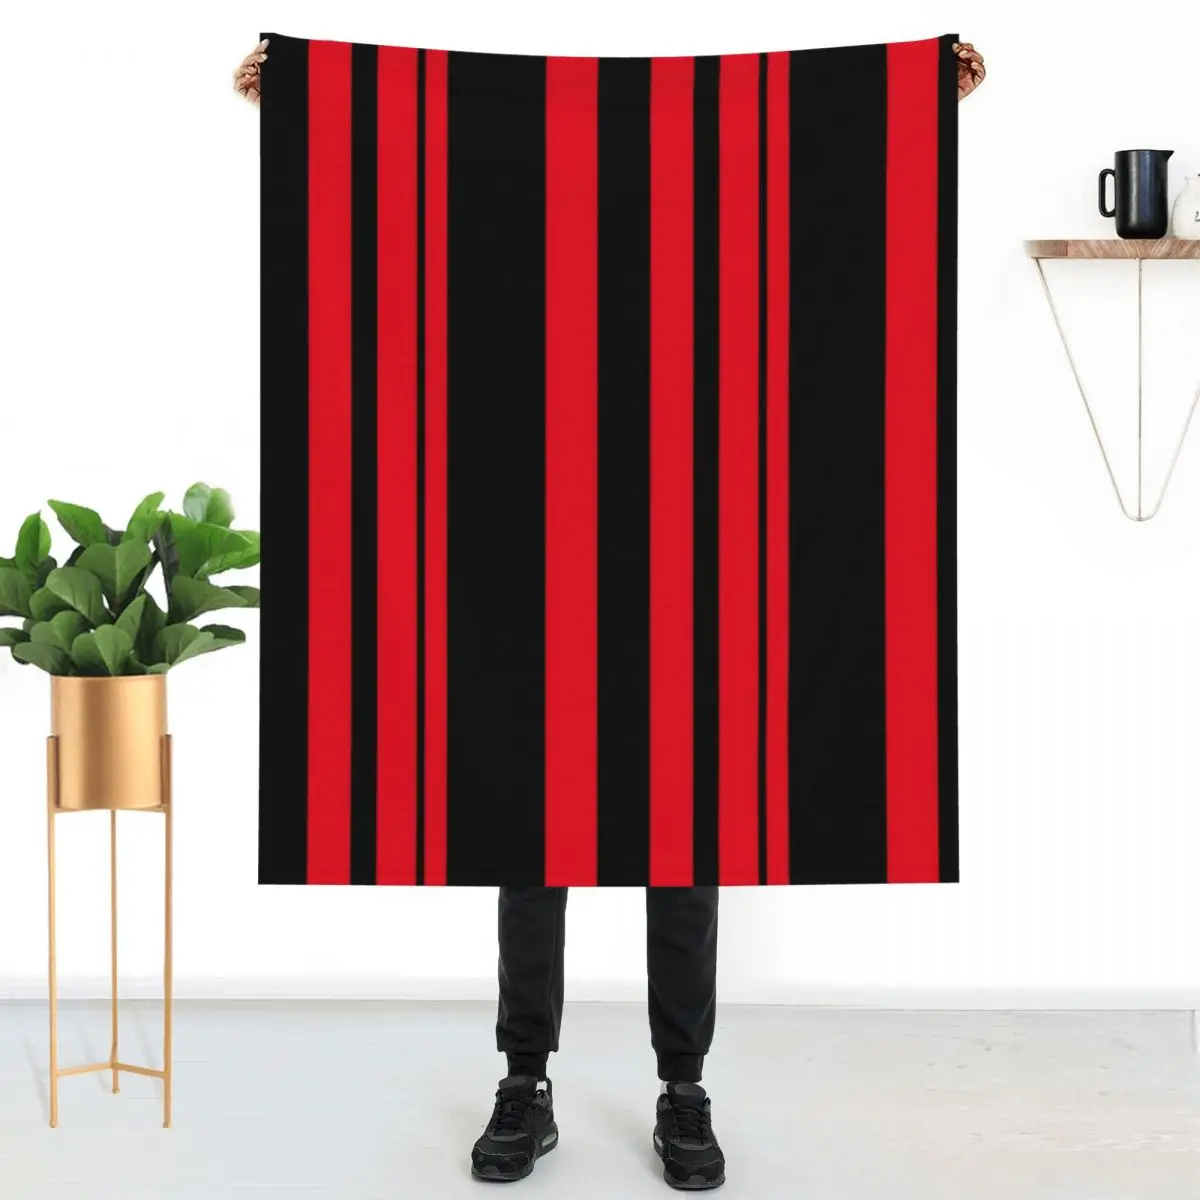 

Two Tone Blanket Black And Red Striped Very Warm For Sofa Throw Blanket Fun Luxury Blankets